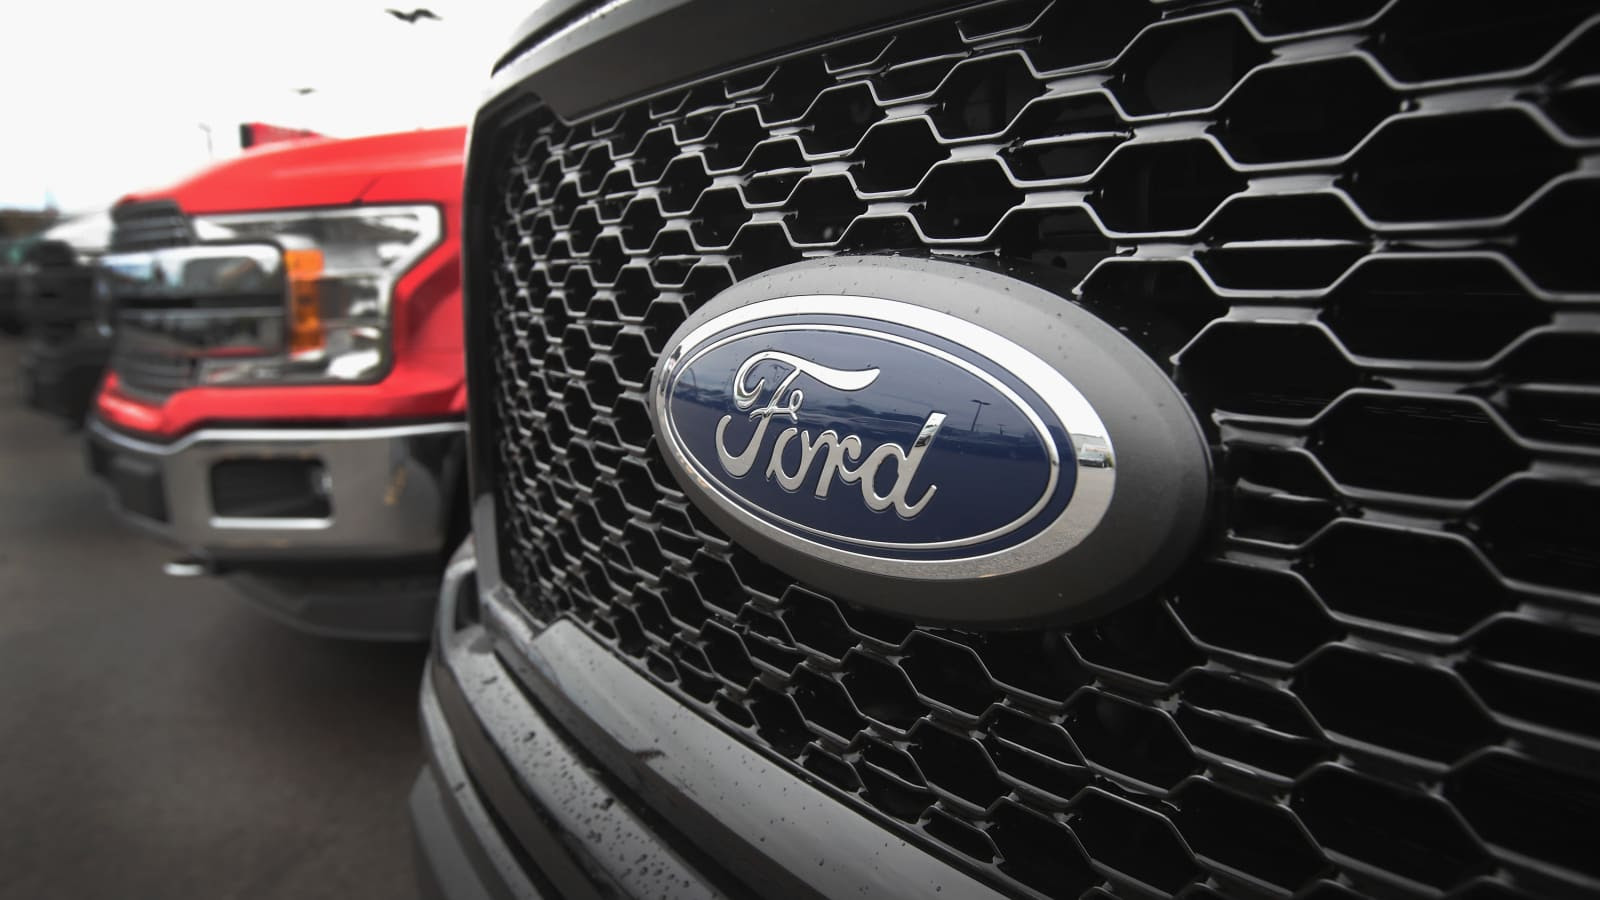 Ford's supply-chain problems include blue oval badges for F-Series pickups